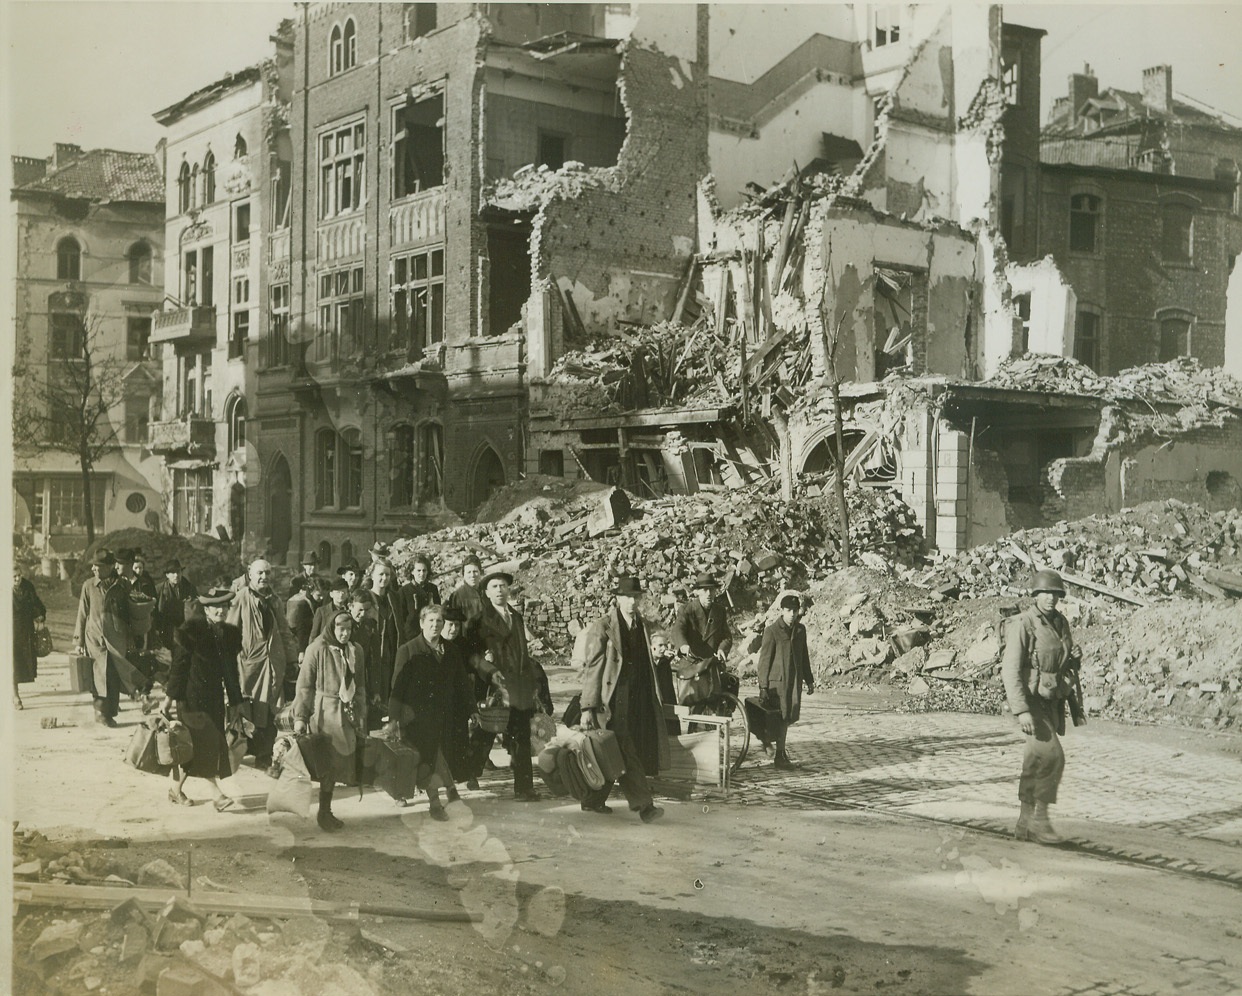 Leaving a Sinking Ship, 10/20/1944. Aachen, Germany – Carrying a minimum of baggage, German civilians leave their cellar hideouts in Aachen and head for safer areas, led by an American soldier. Supreme Allied Headquarters announced today that the last enemy resistance had been mopped-up, and the city is in the hands of the American First Army – the first great German city to fall to the Allies. Credit (ACME photo by Bert Brandt, War Pool Correspondent);